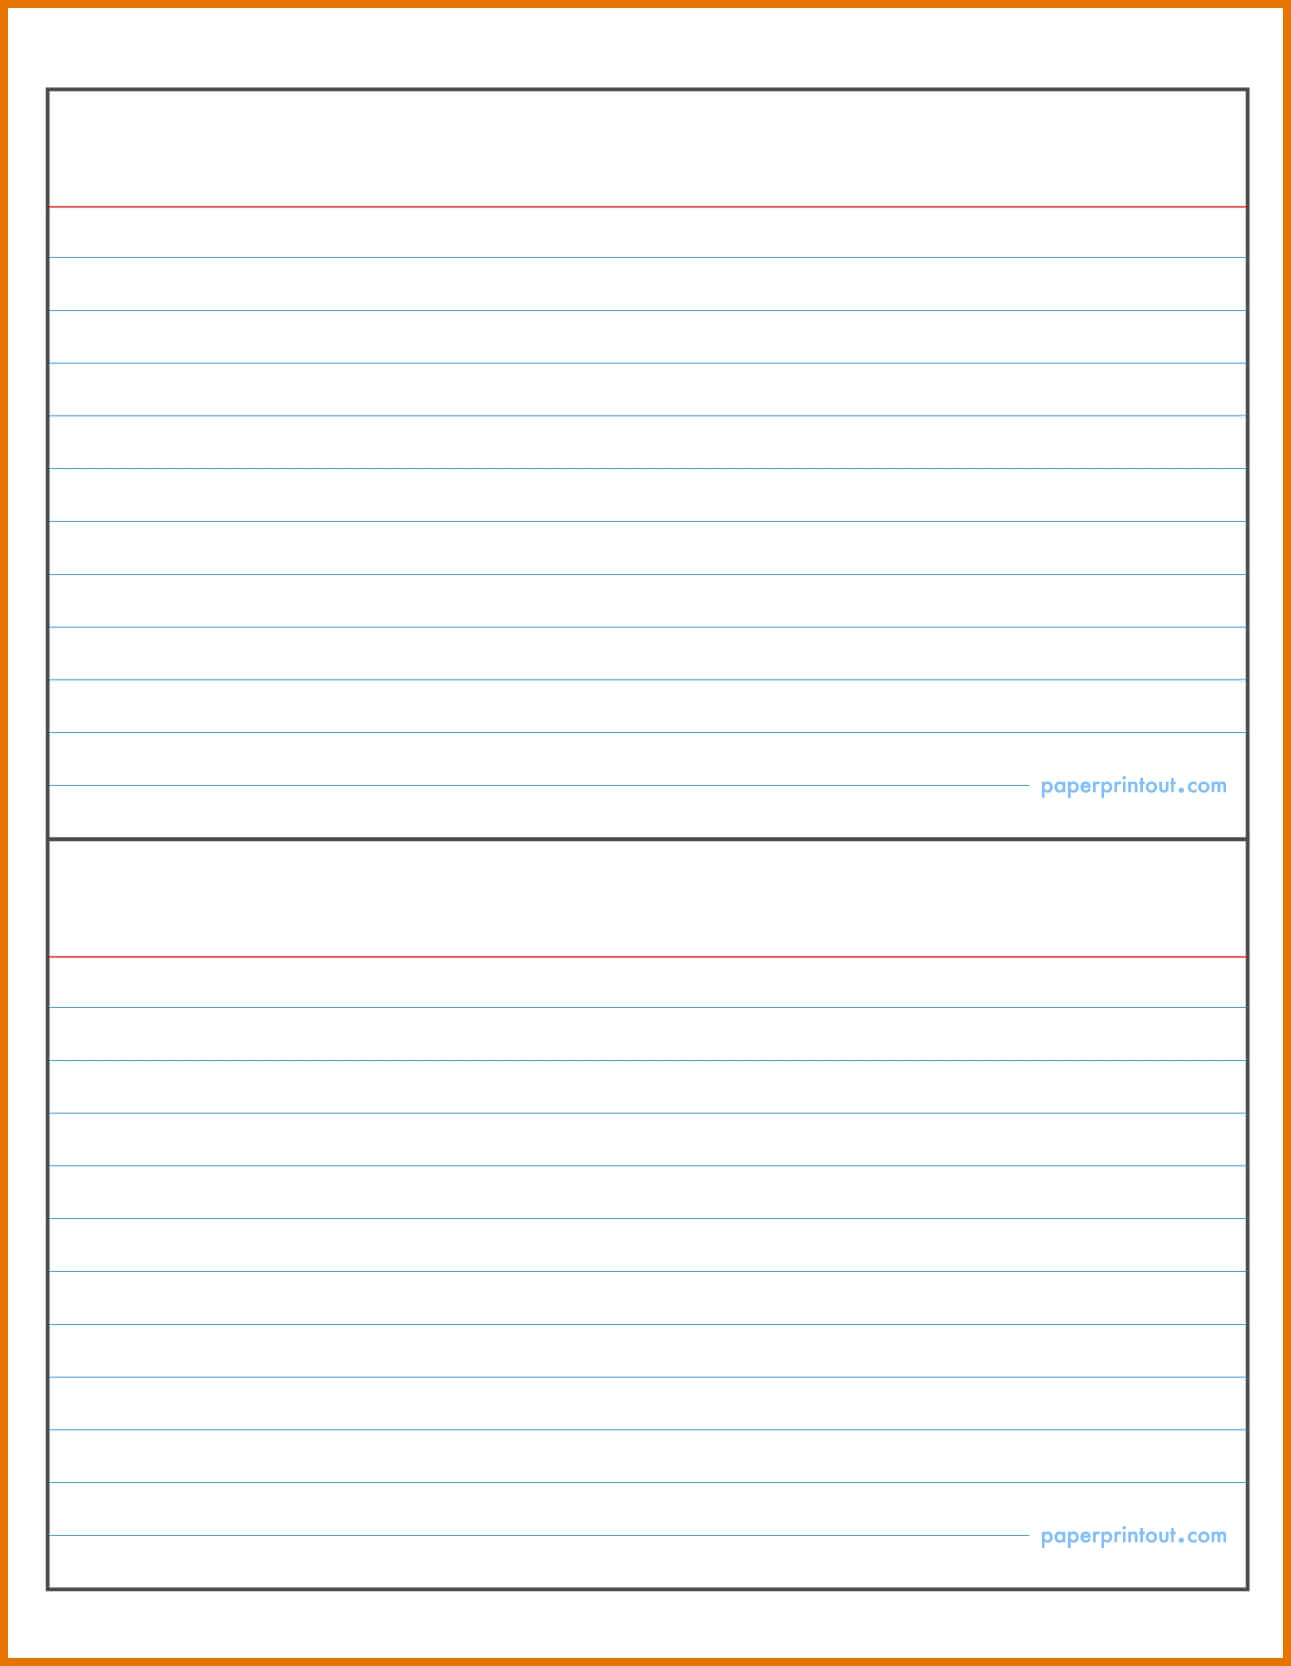 20 Images Of Ms Word 3 X 5 Index Card Template | Zeept Throughout 3X5 Note Card Template For Word